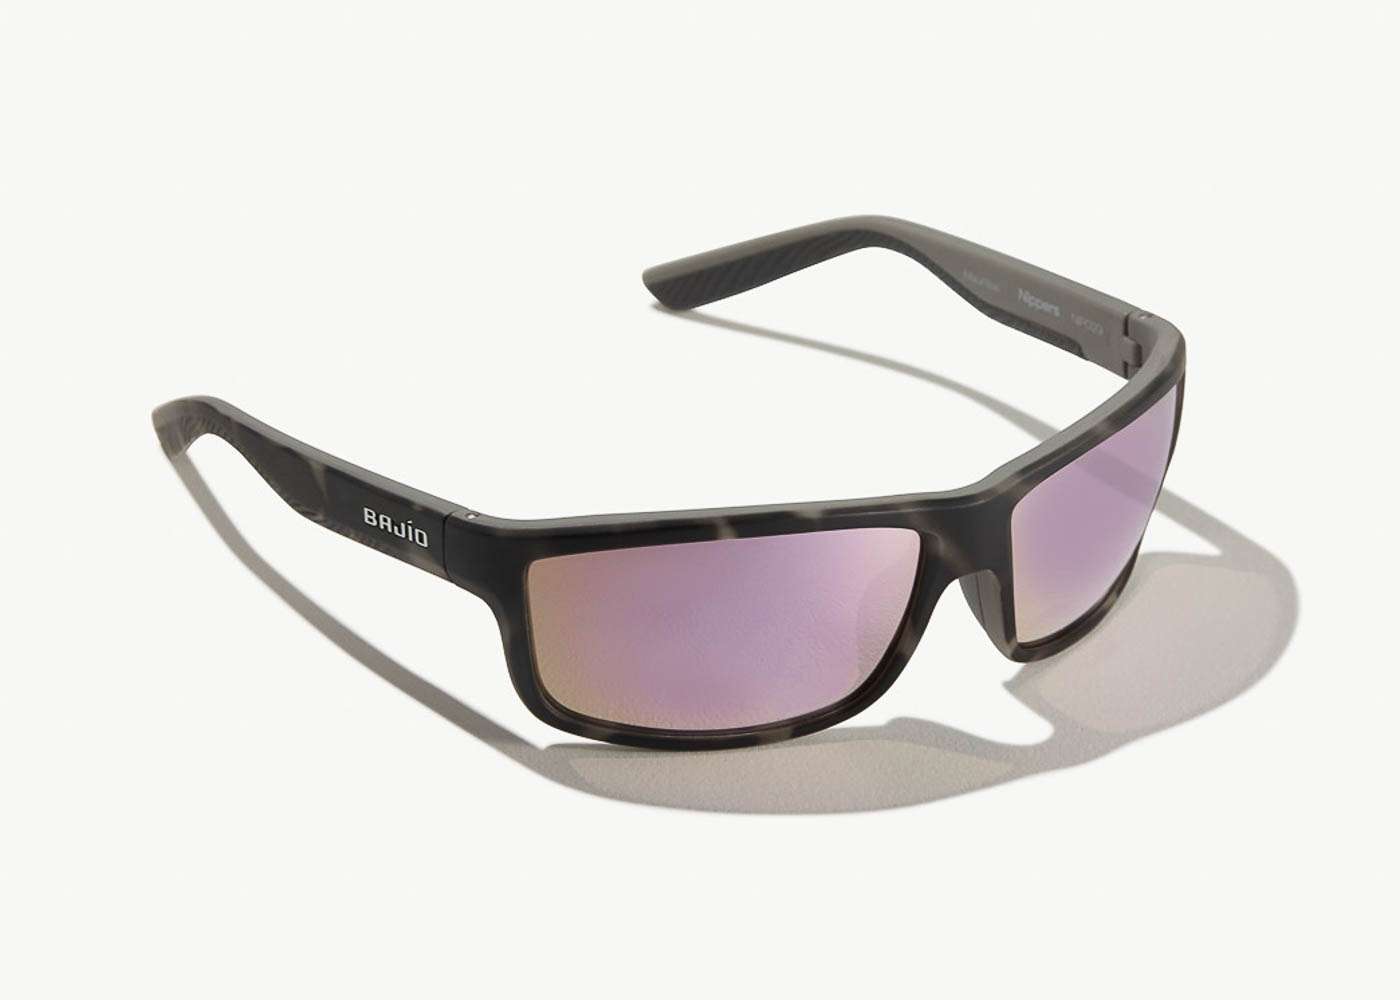 <p><strong>Bajio Nippers Sunglasses</strong></p><p>Casual style and technical features define Nippers. Wide, curved lenses provide enhanced field of vision, and LAPIS polarized lens technology slices through glare for better fish-spotting. Blue light-blocking coating prevents eye fatigue to maintain visual acuity during marathon days in the sun. This technology blocks 95% of harmful blue light. The low-density, bio-based nylon frames are lighter than traditional oil-based polymersâyet also provide higher strength and impact resistance. $199 Plastic Lenses. $249 Glass Lenses. <a href=